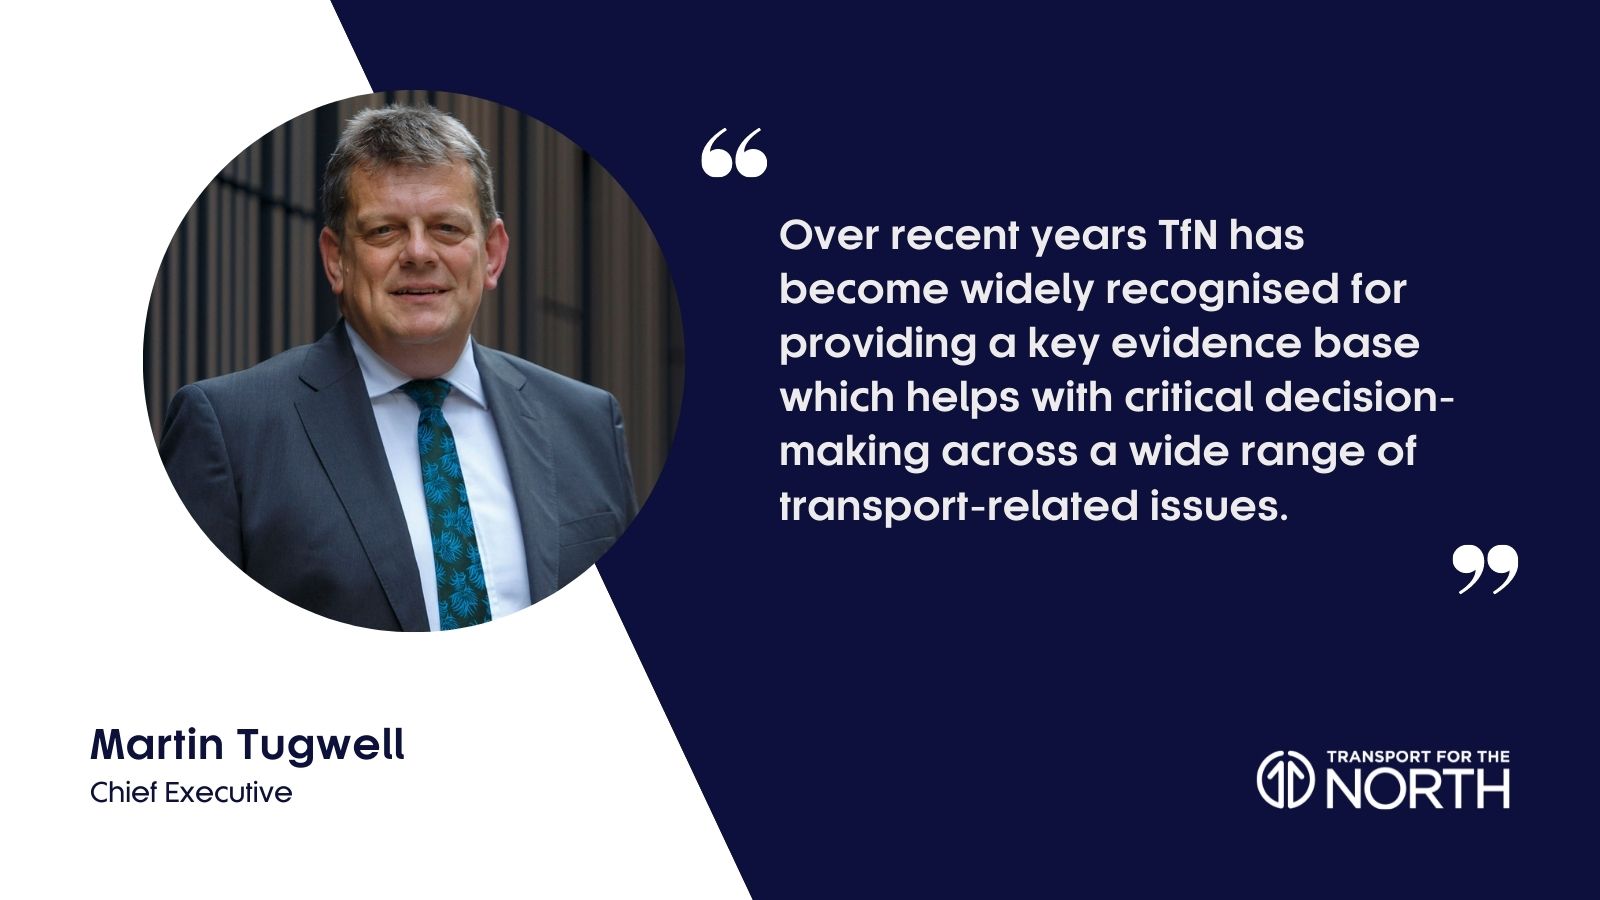 Quote from Martin Tugwell ahead of Transport for the North board meeting in June 2022